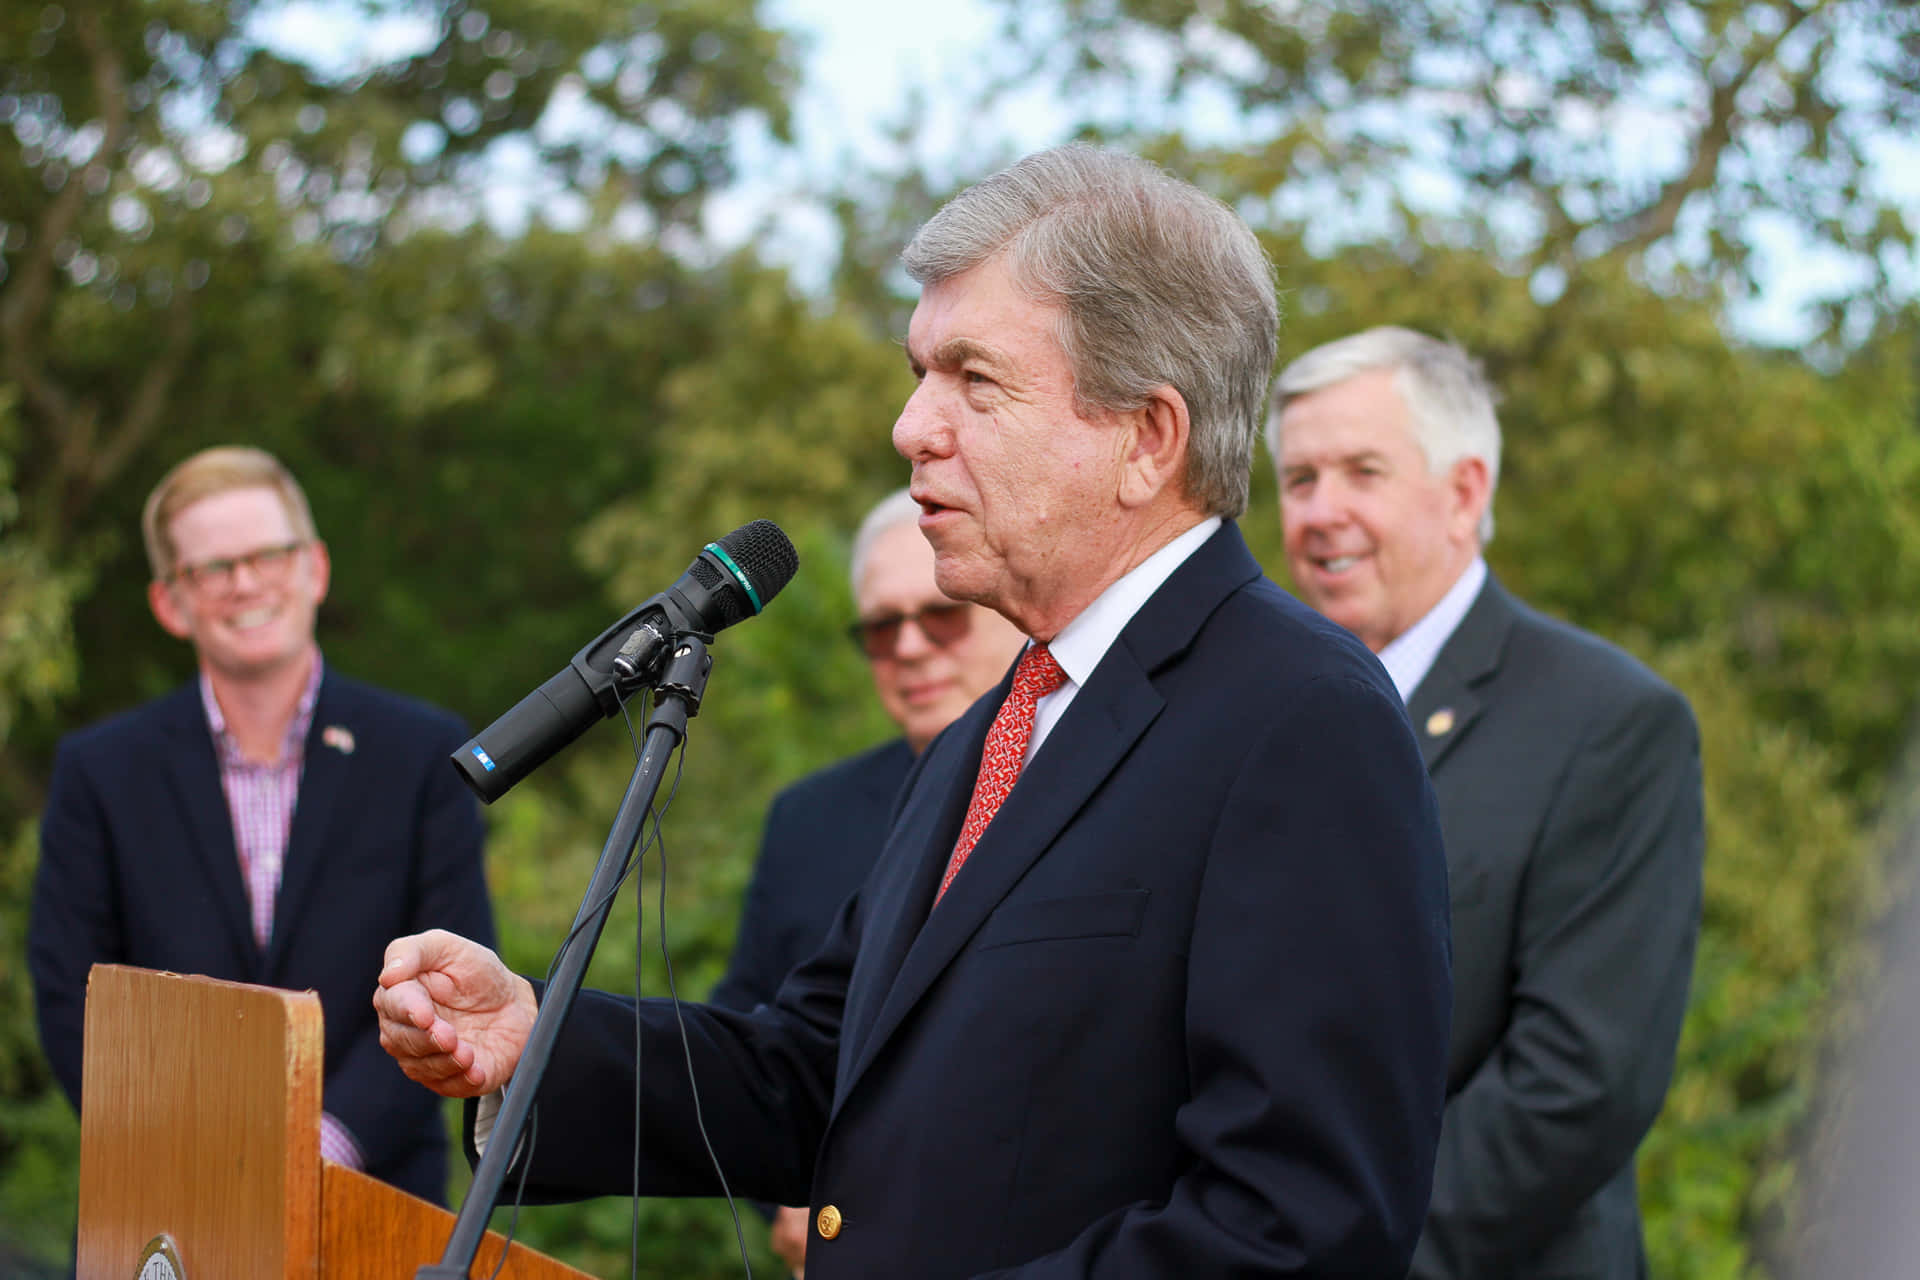 Roy Blunt addressing his listeners during an event. Wallpaper